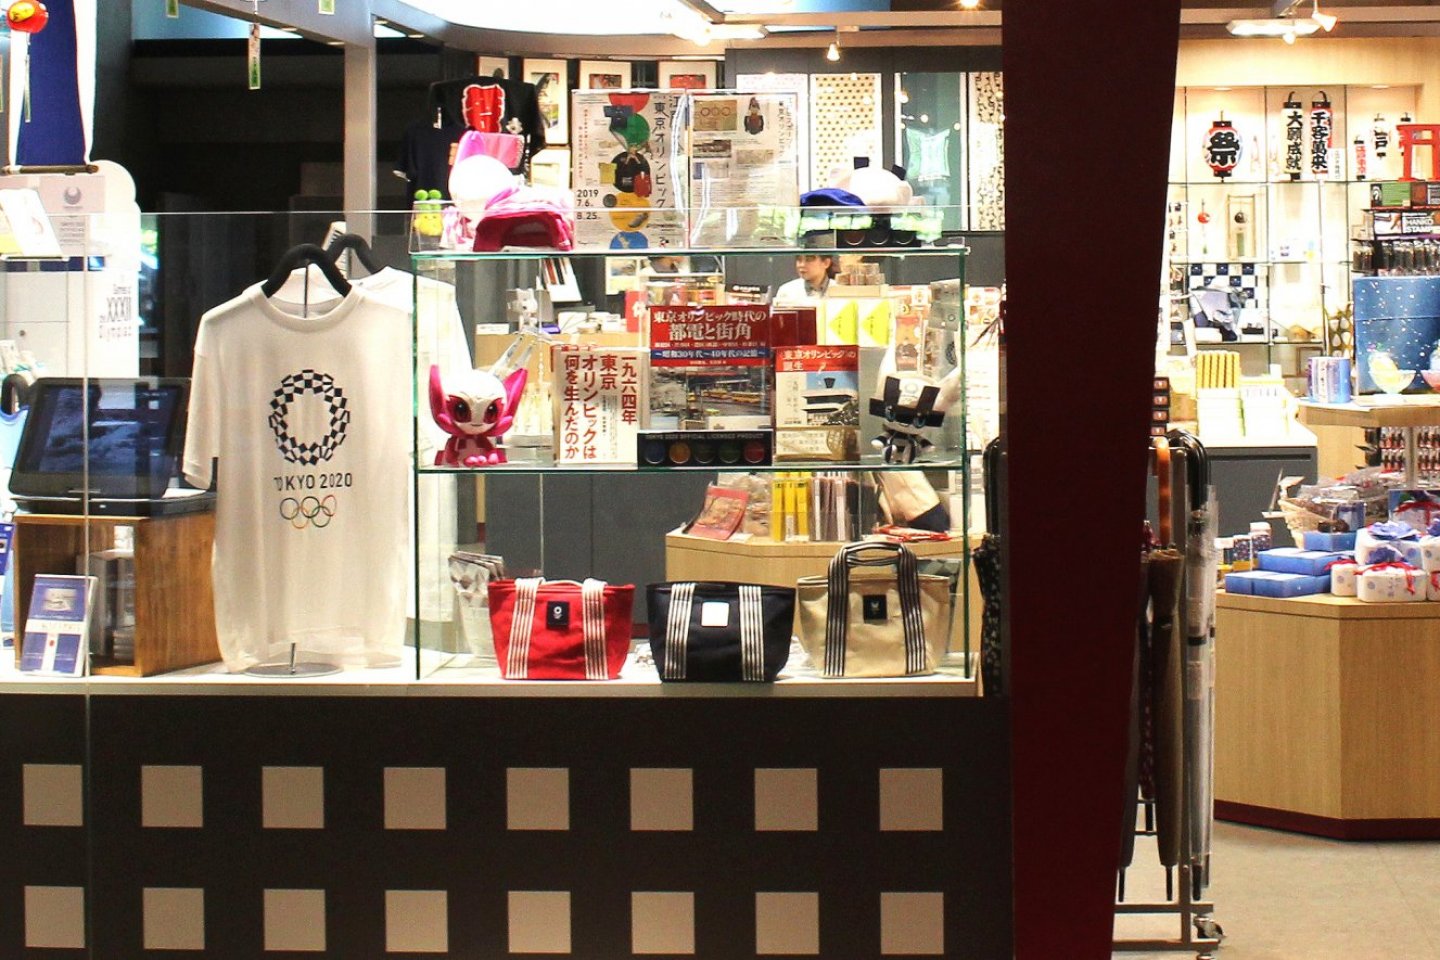 The 2020 Olympic Games souvenirs are available in many shops